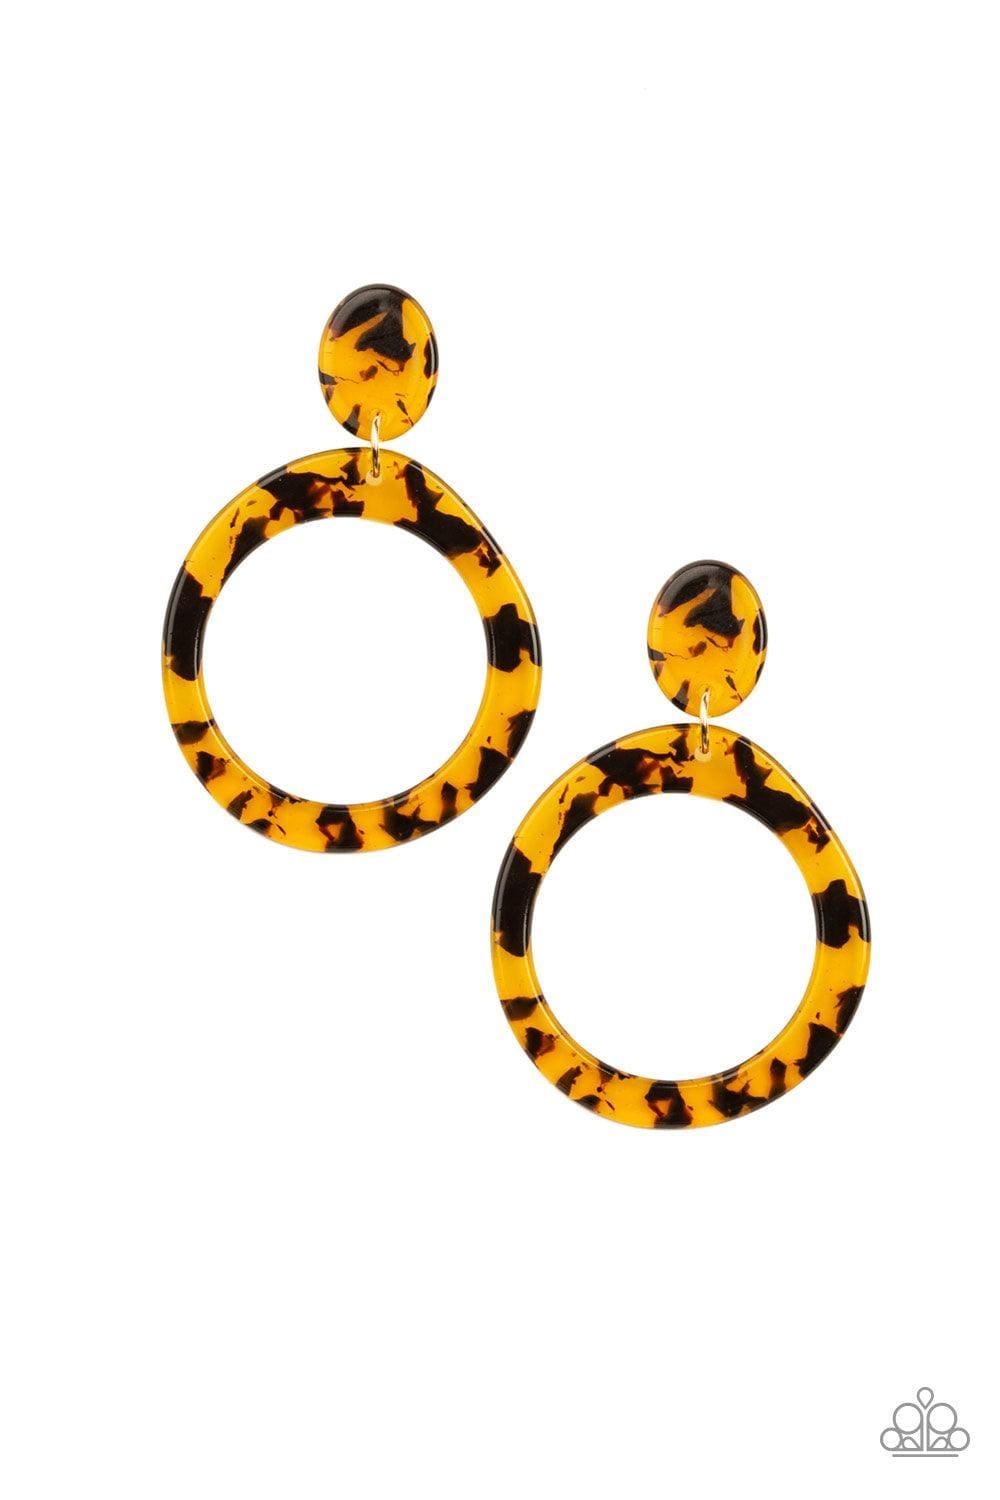 Paparazzi Accessories - Fish Out Of Water - Yellow Earrings - Bling by JessieK